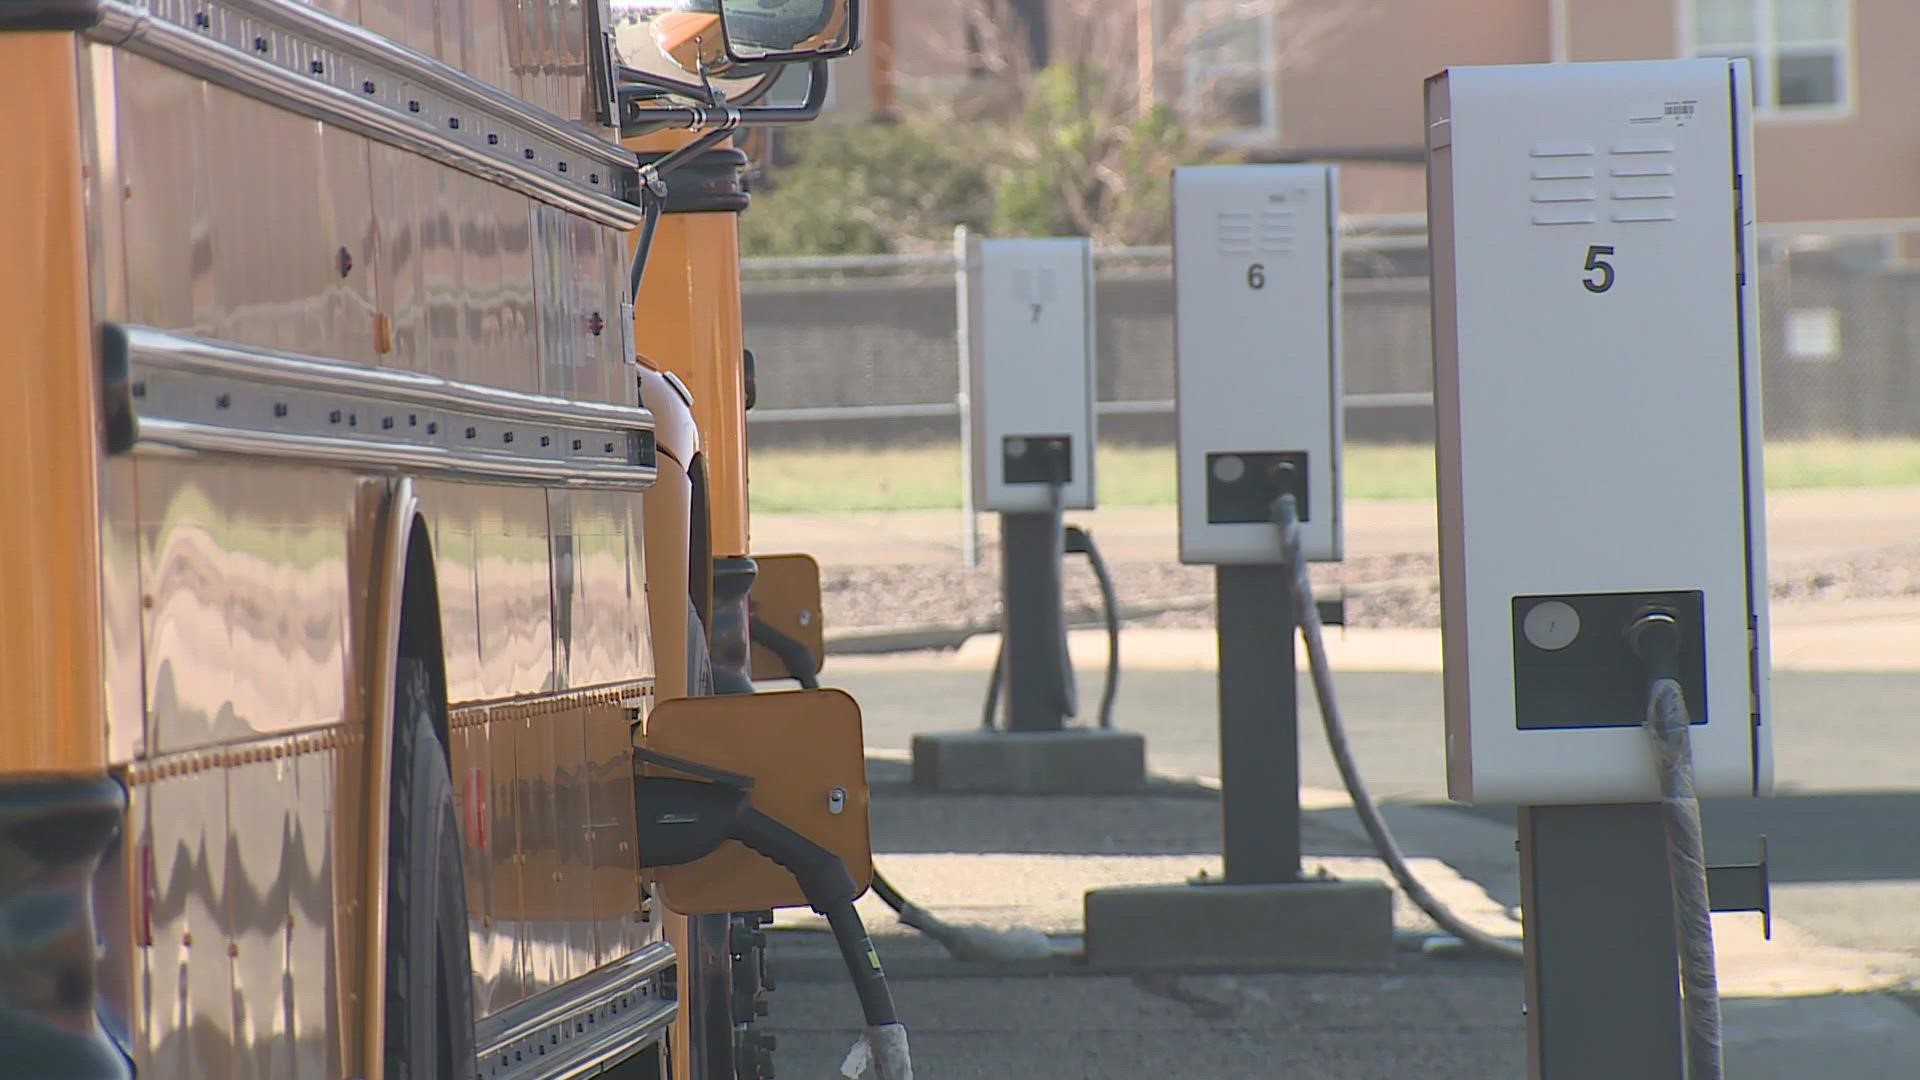 The new buses are part of an initiative from the district to lower emissions and save money in the future.